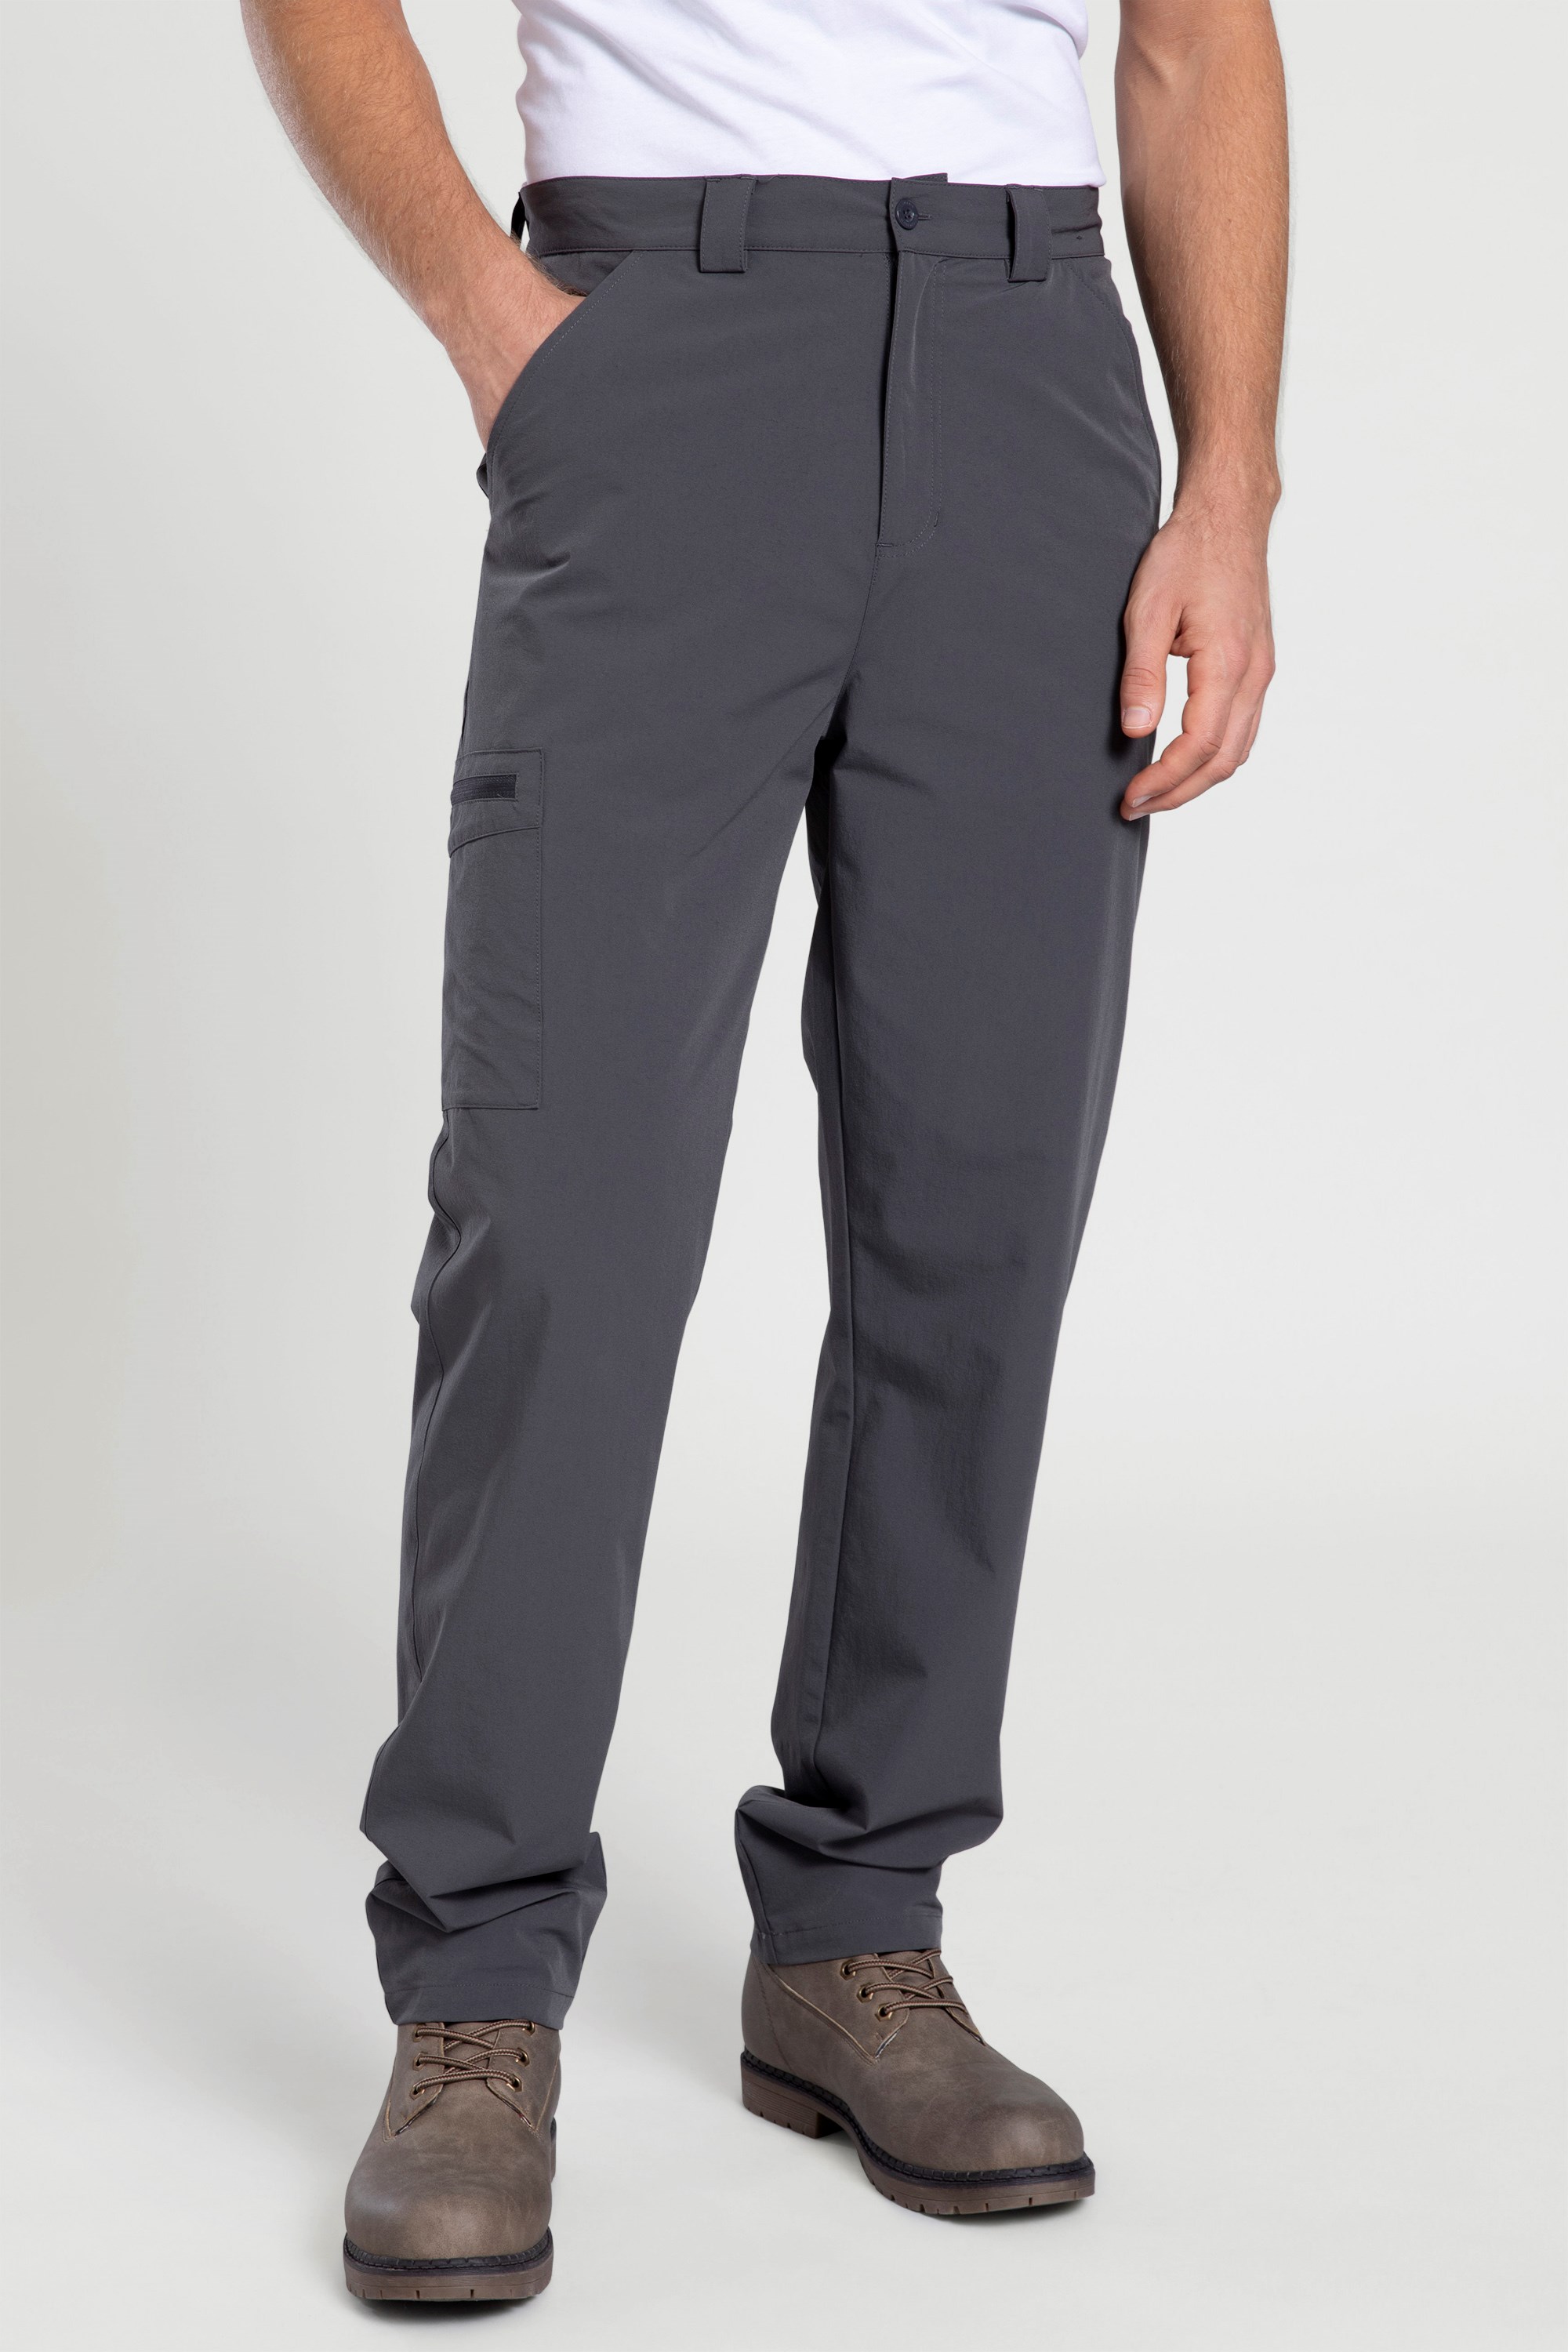 Beam Mens Stretch Trousers - Grey